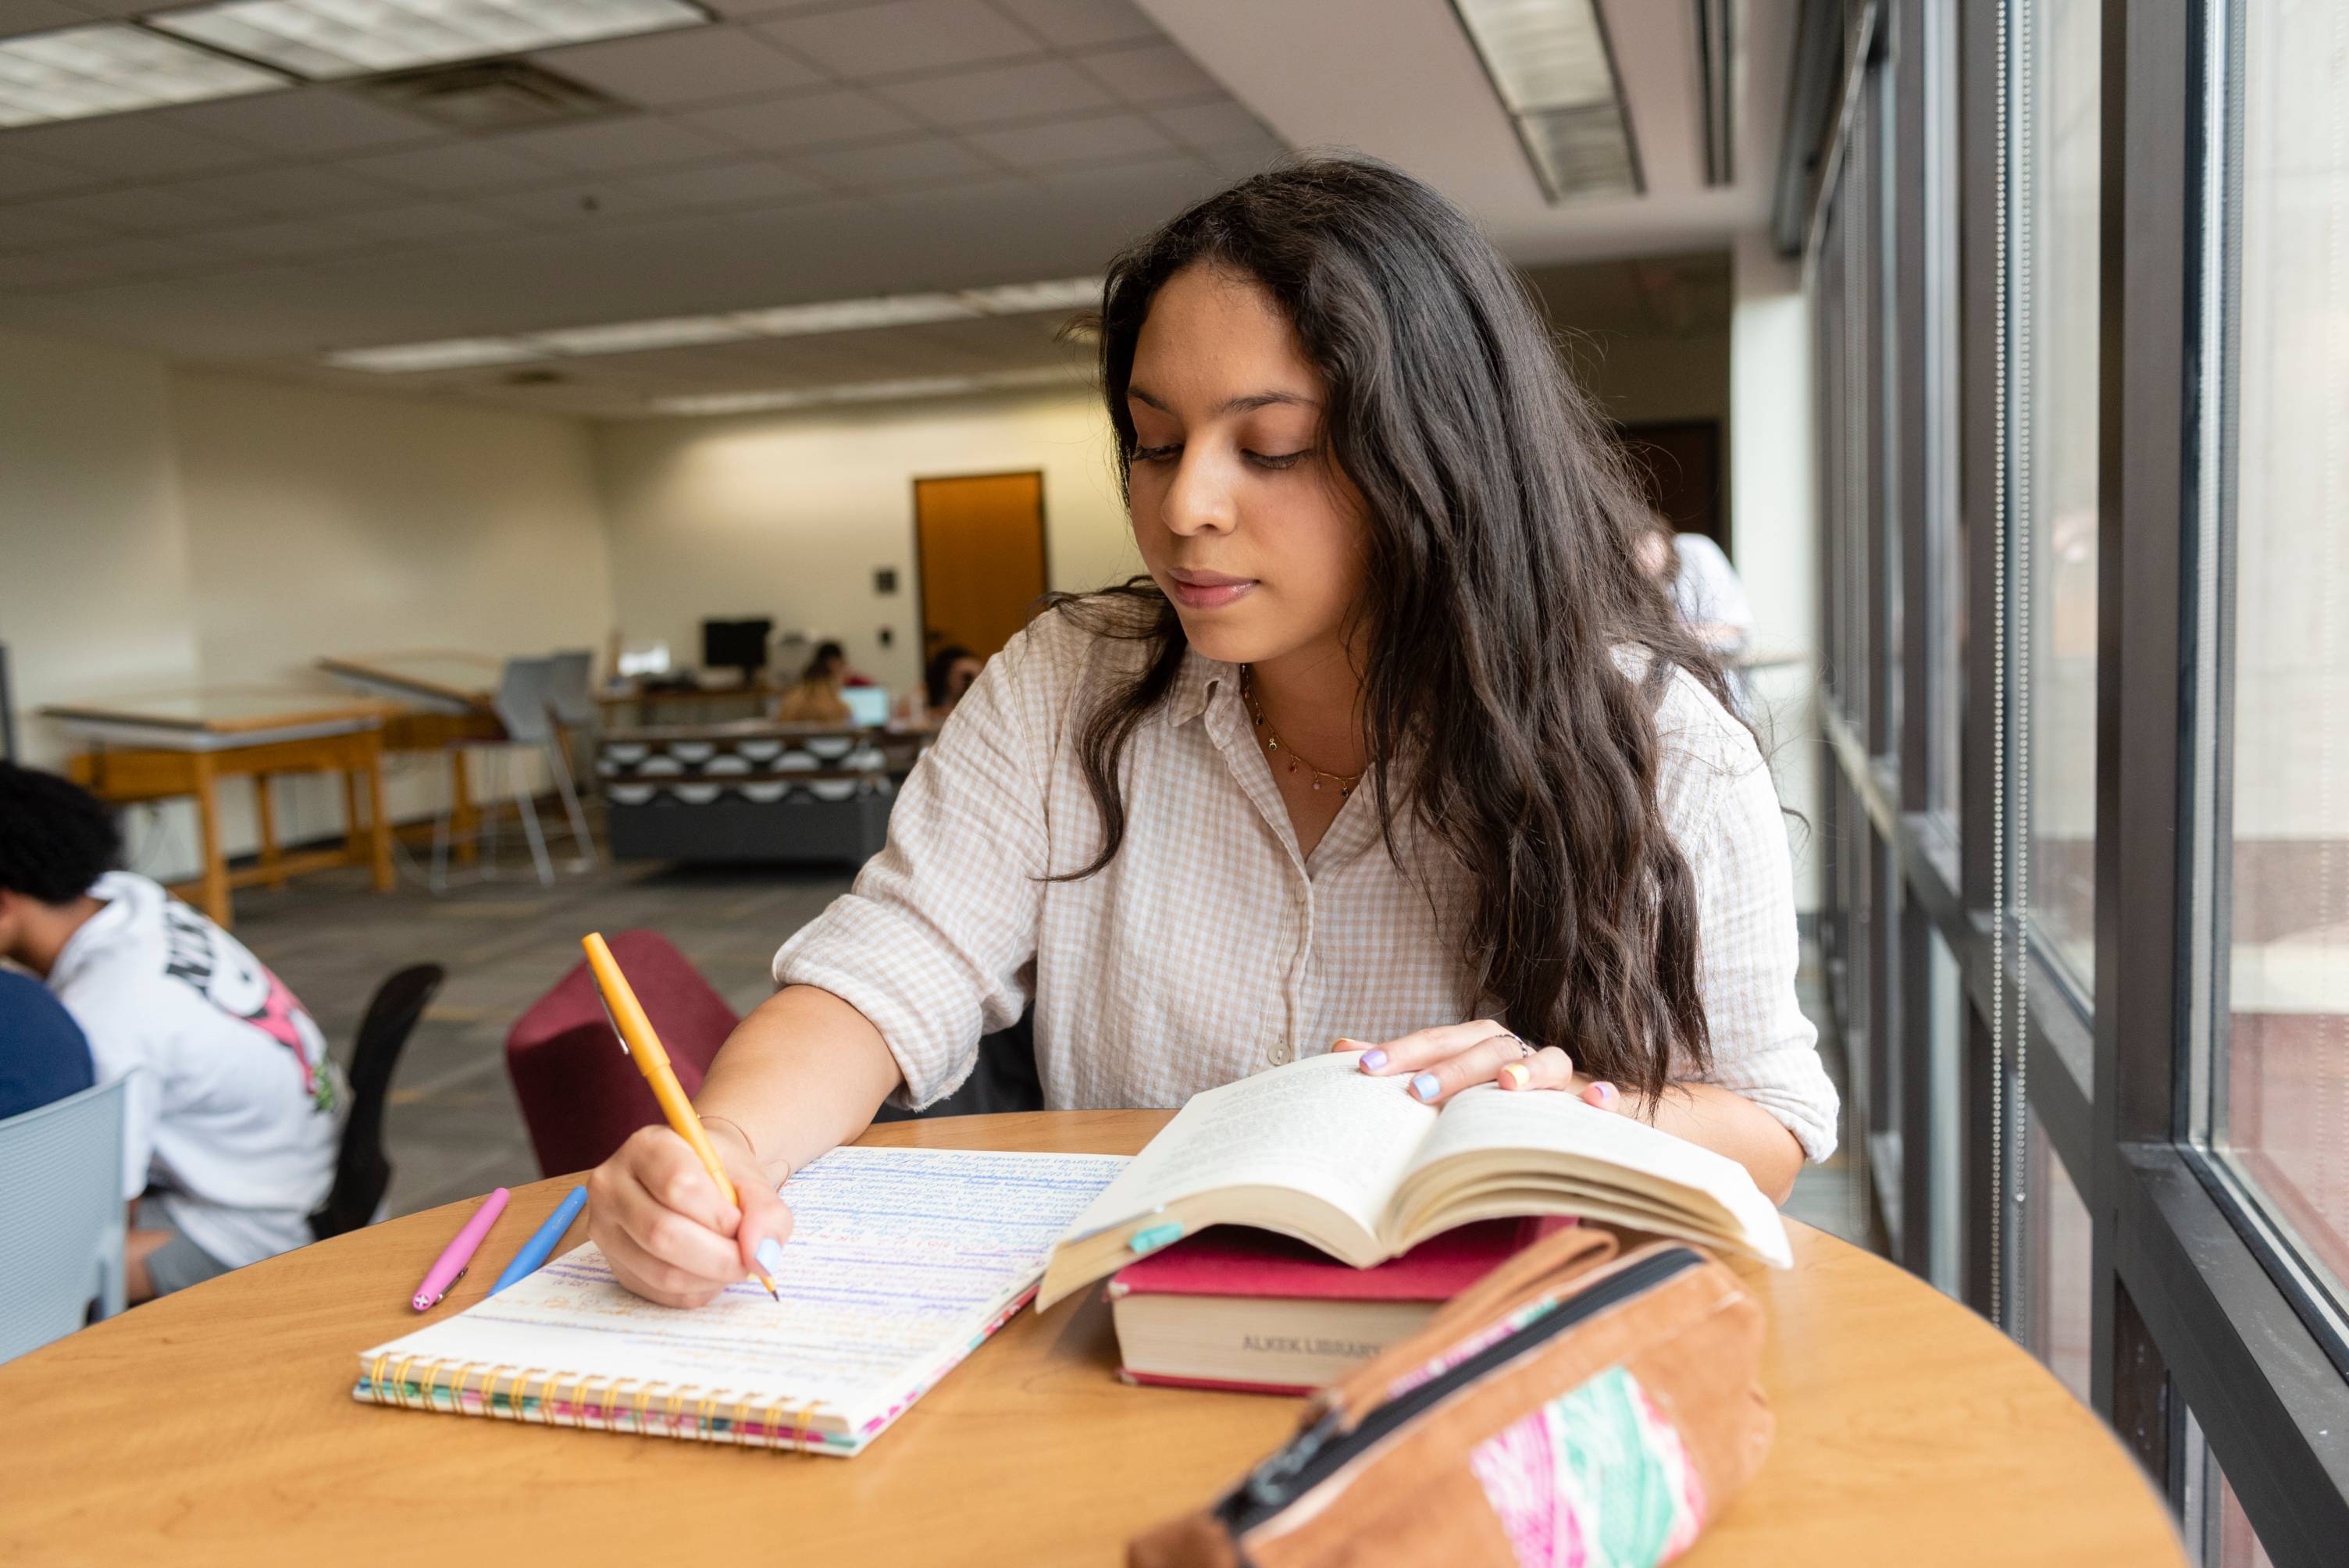 Student sitting at a table studying